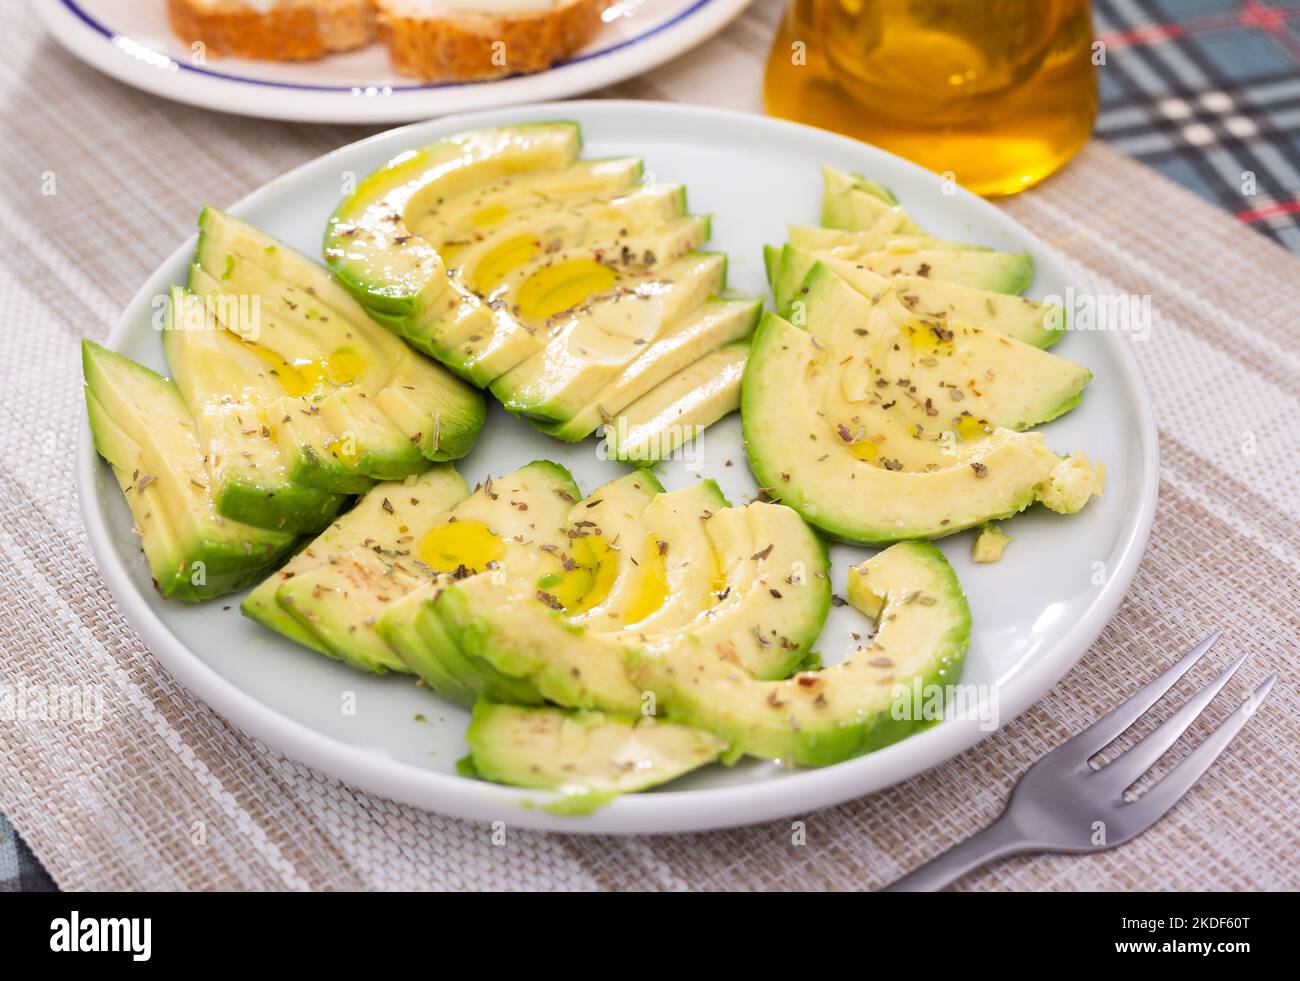 ripe avocado pulp cut into pieces sprinkled with lemon juice on a plate Stock Photo